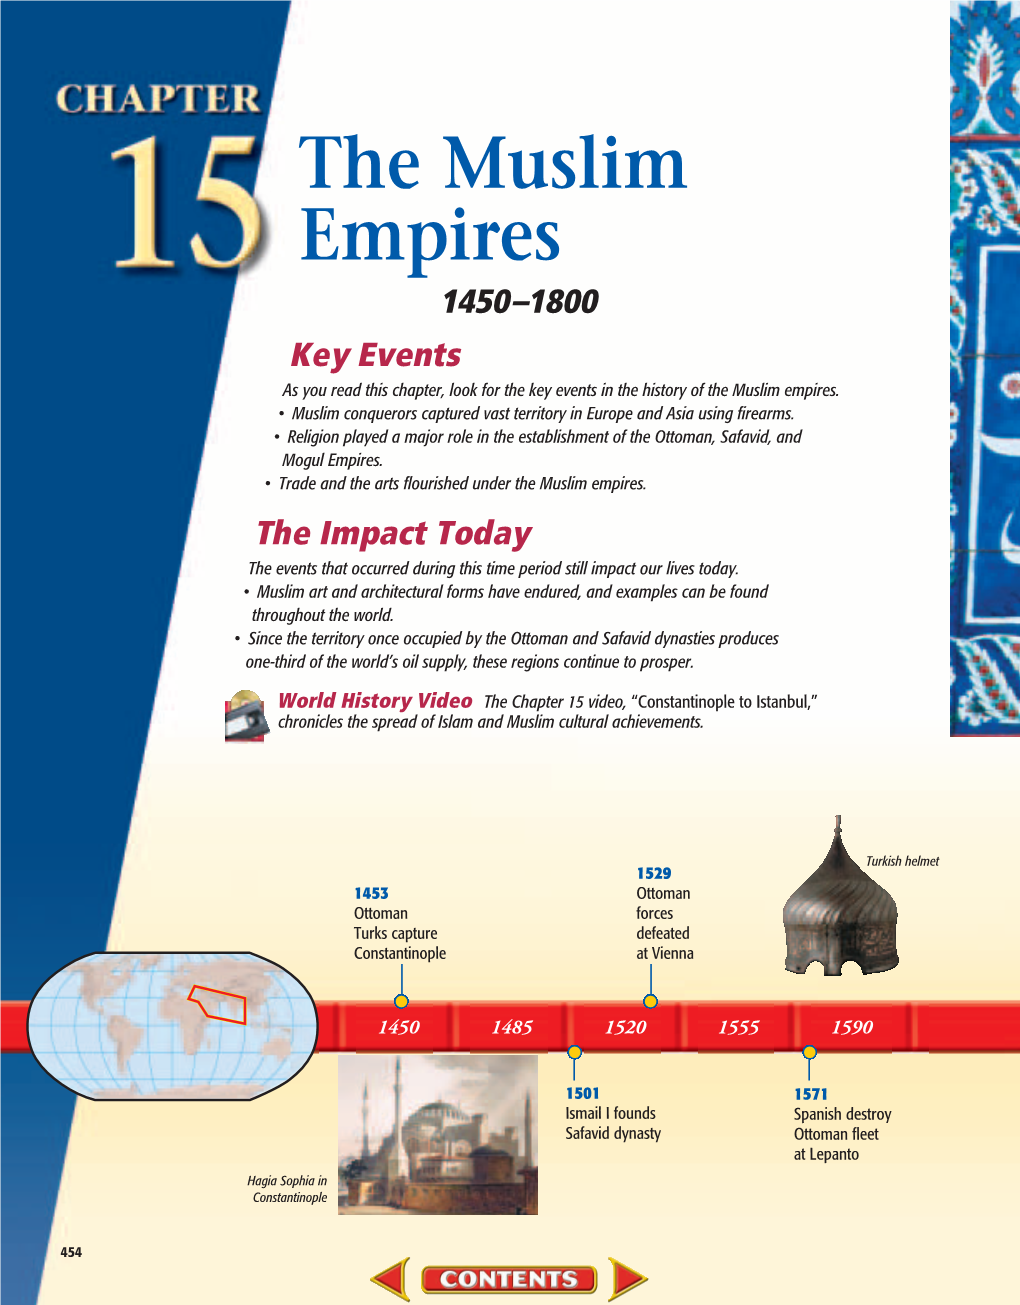 Chapter 15: the Muslim Empires, 1450-1800